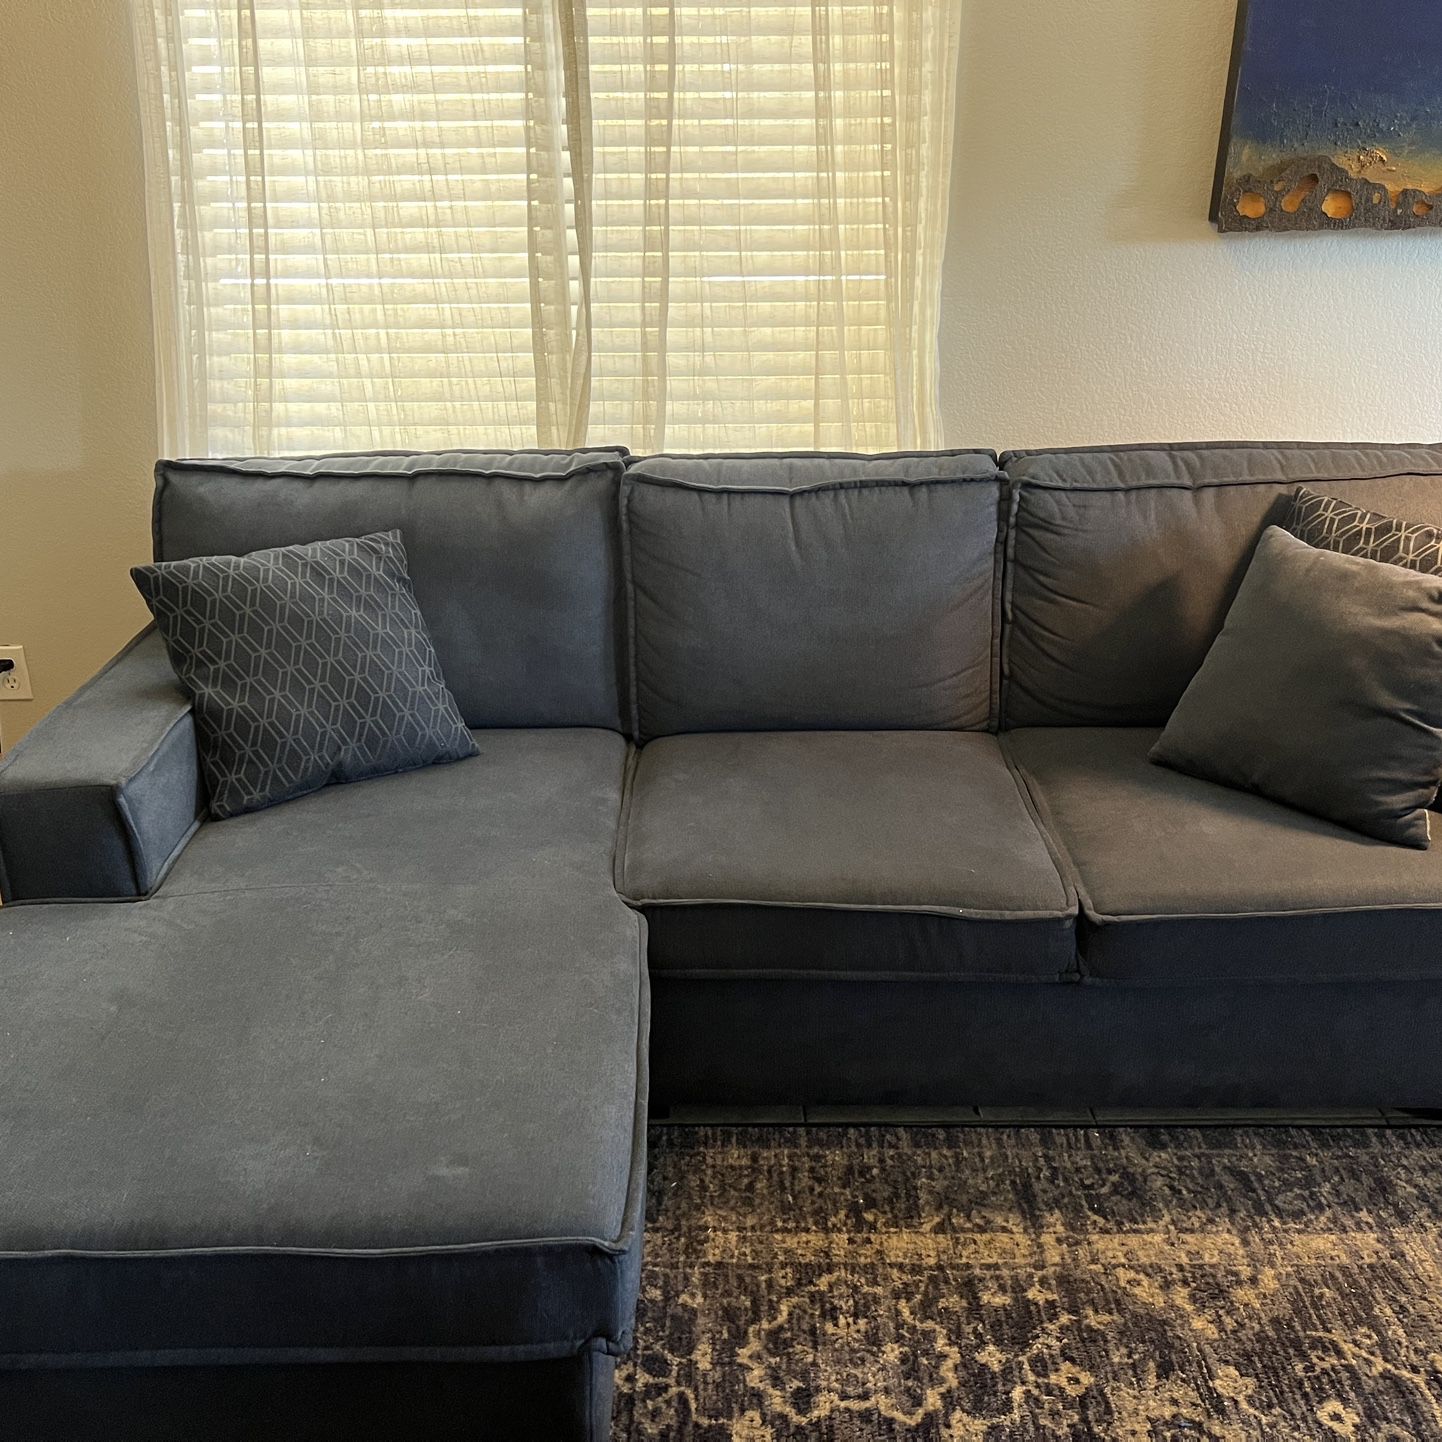 Sectional Sofa With Storage And Bed.